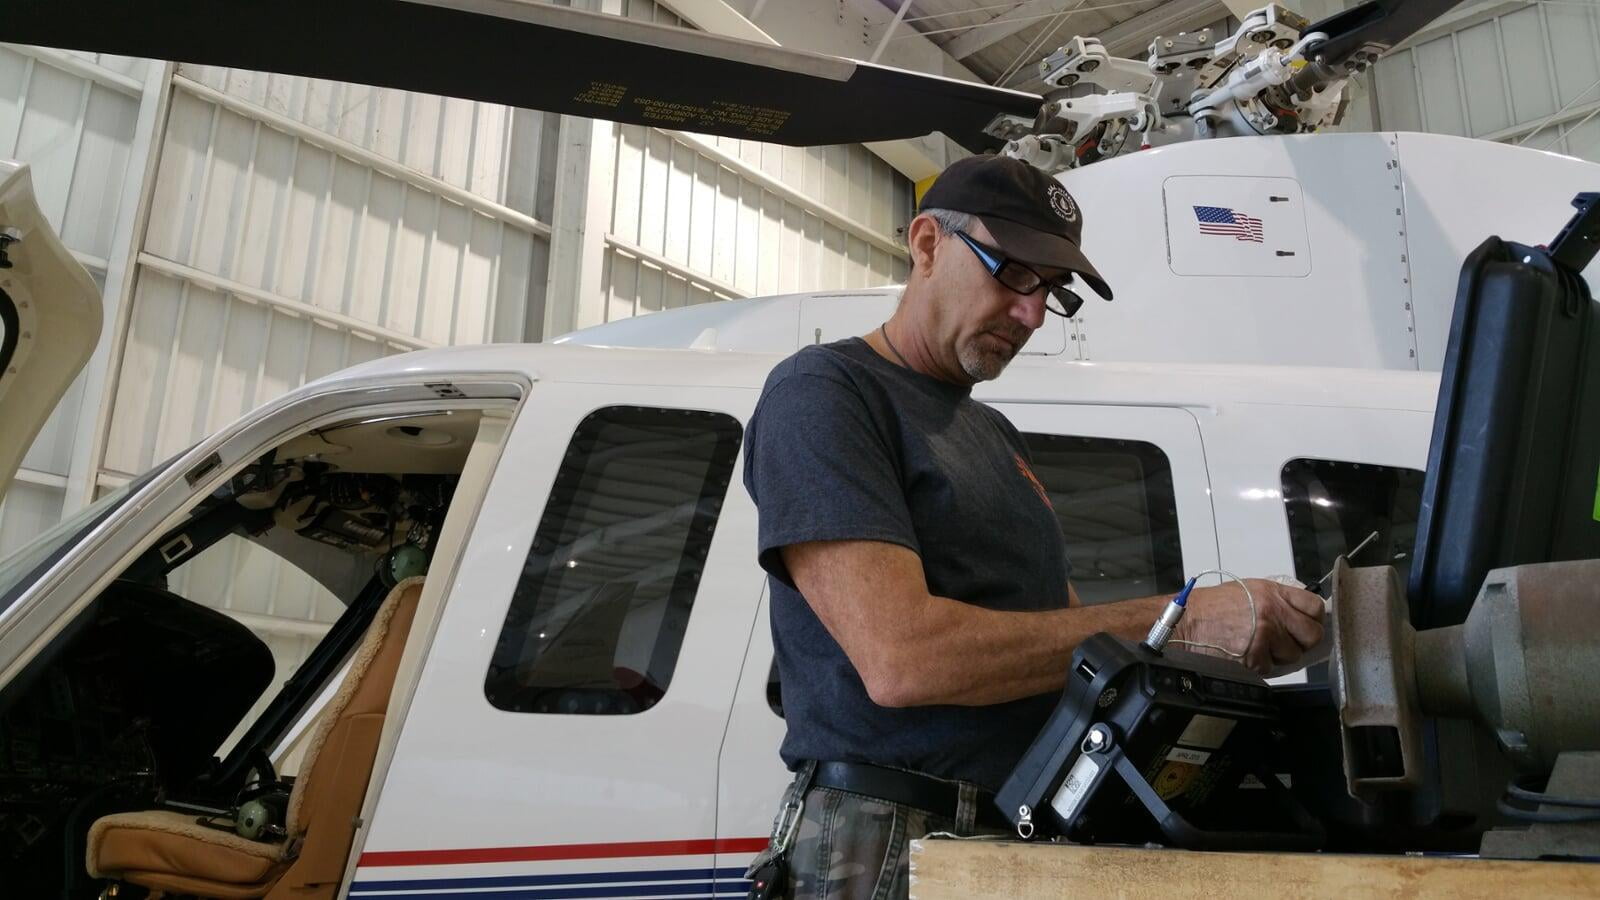 A SEAL Aviation NDT Tech preparing to perform an eddy current inspection on a helipcopter